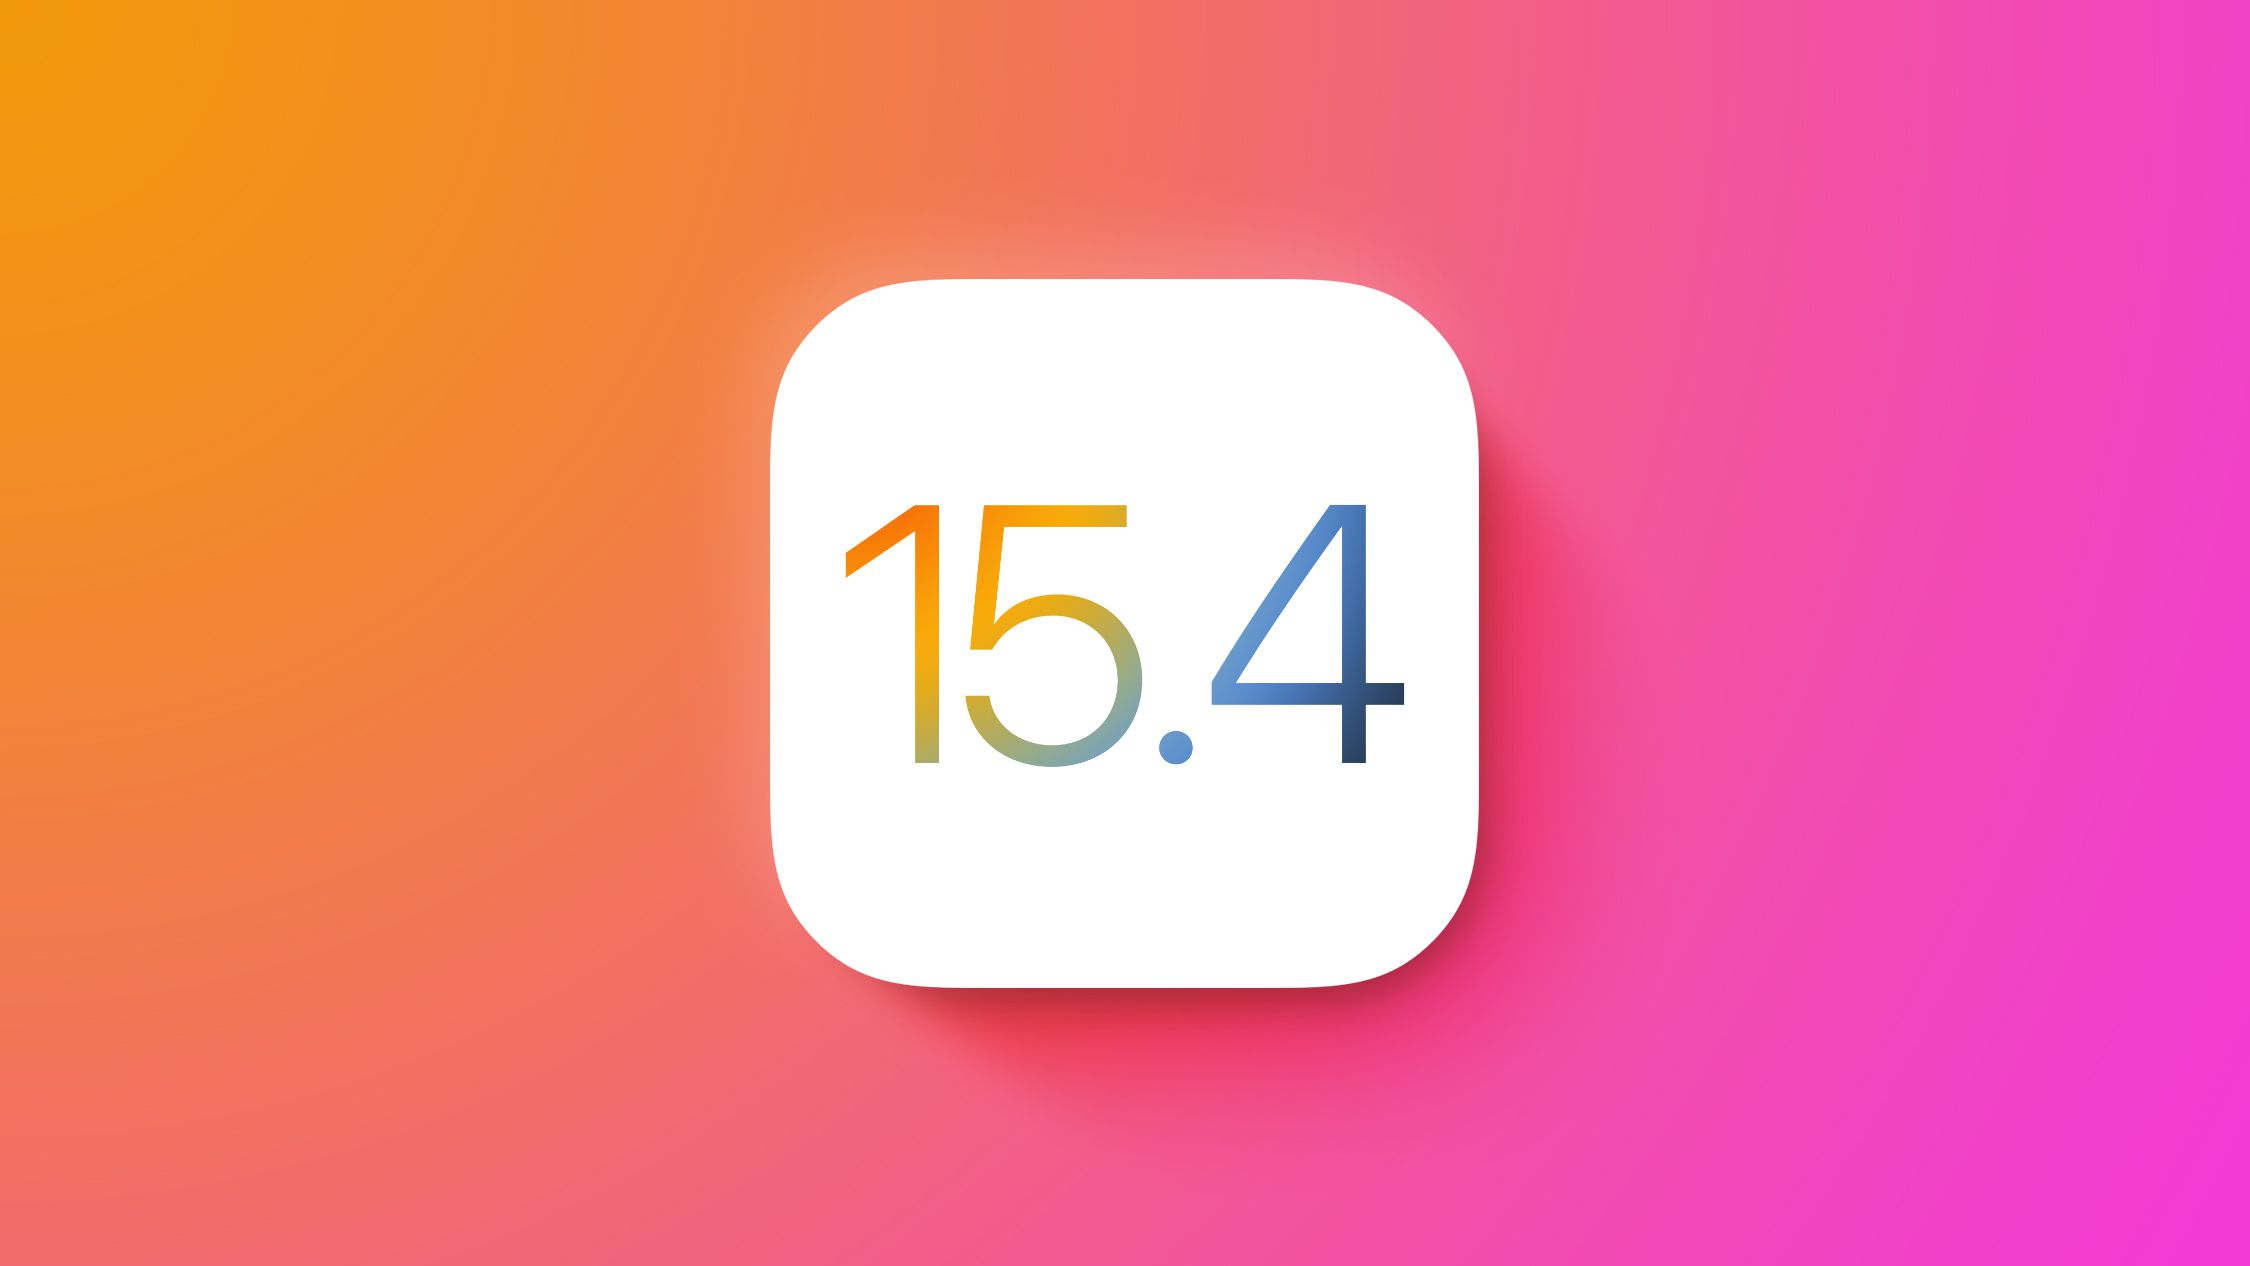 Apple Seeds Fifth Betas of iOS 15.4 and iPadOS 15.4 to Developers [Update: Public Beta Available]